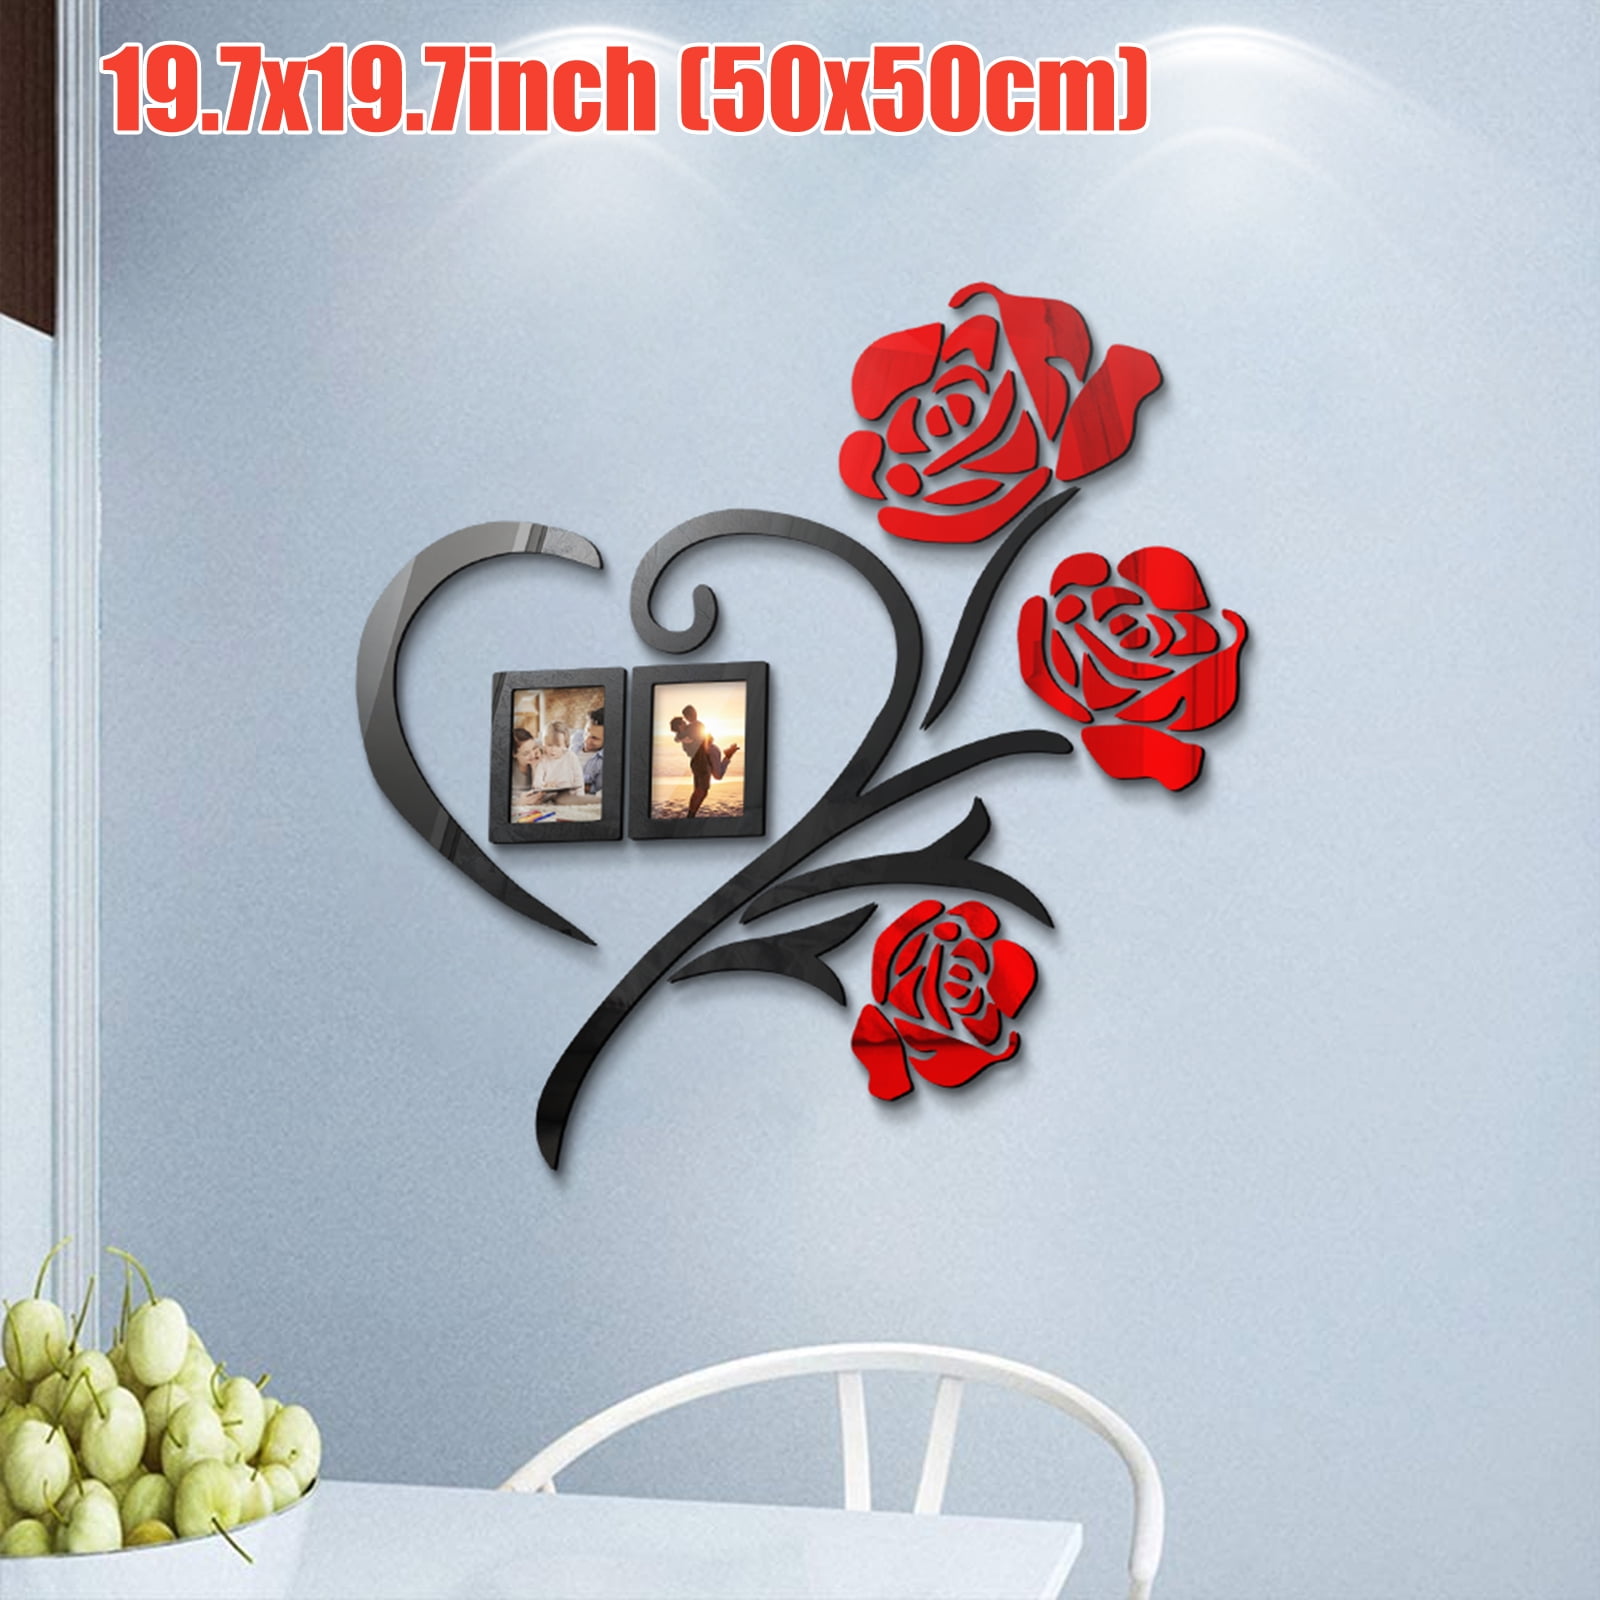 3D Family Love Rose Wall Stickers Decal DIY Photo Frame Mural Home Decors Art